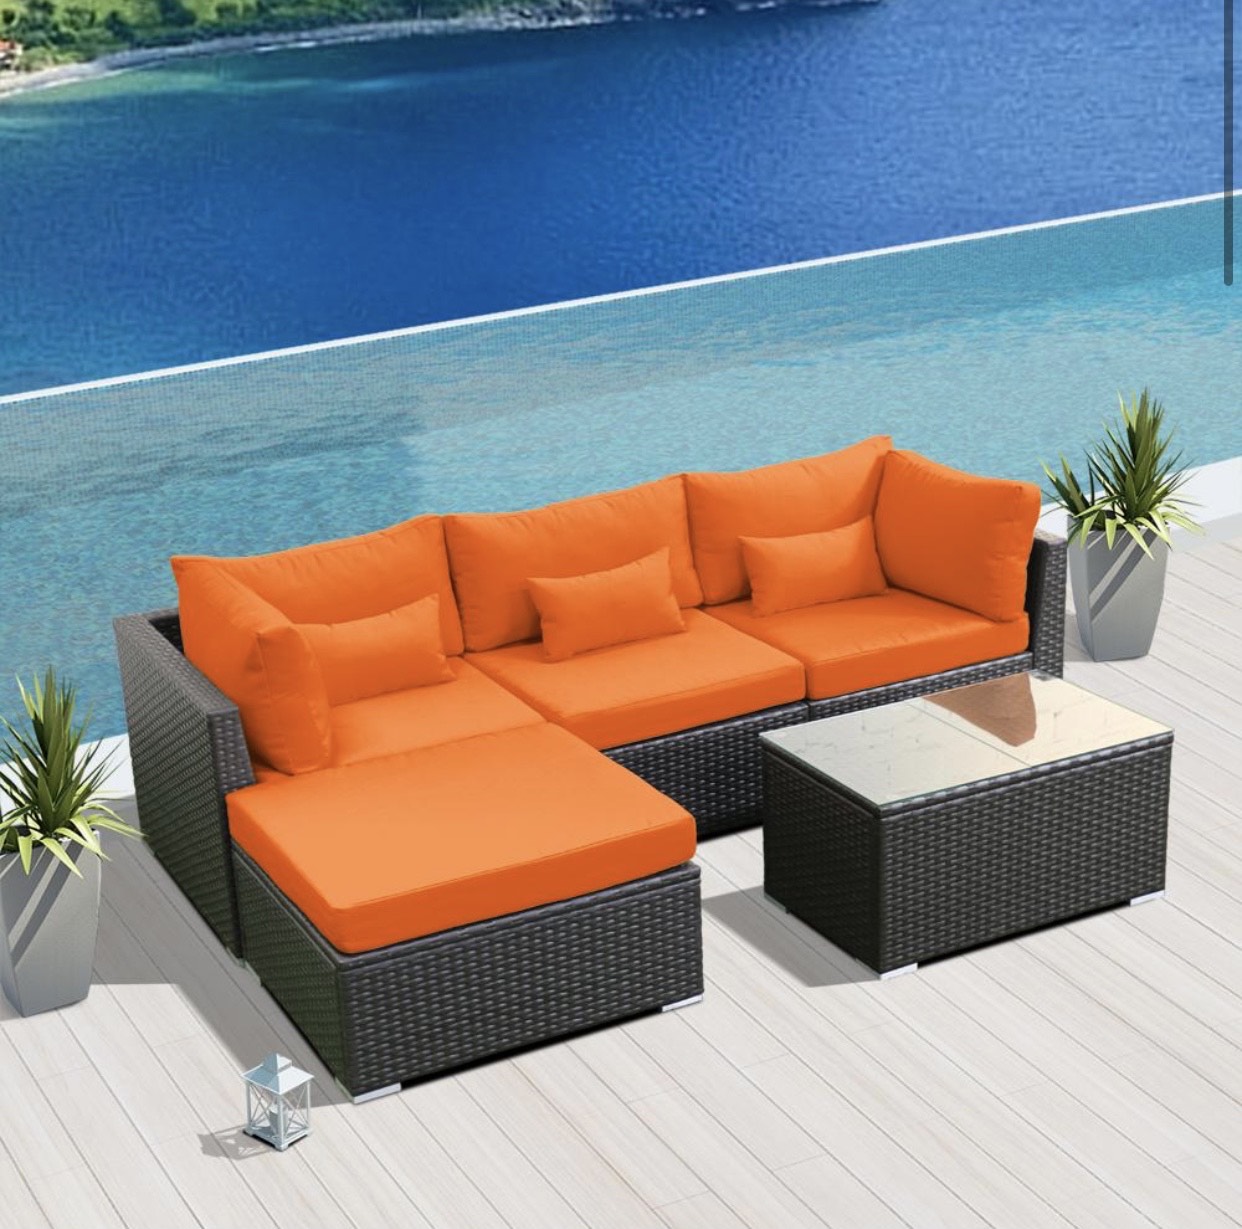 Orange 5H Replacement Cushion Covers Set (Without Foam Insis)